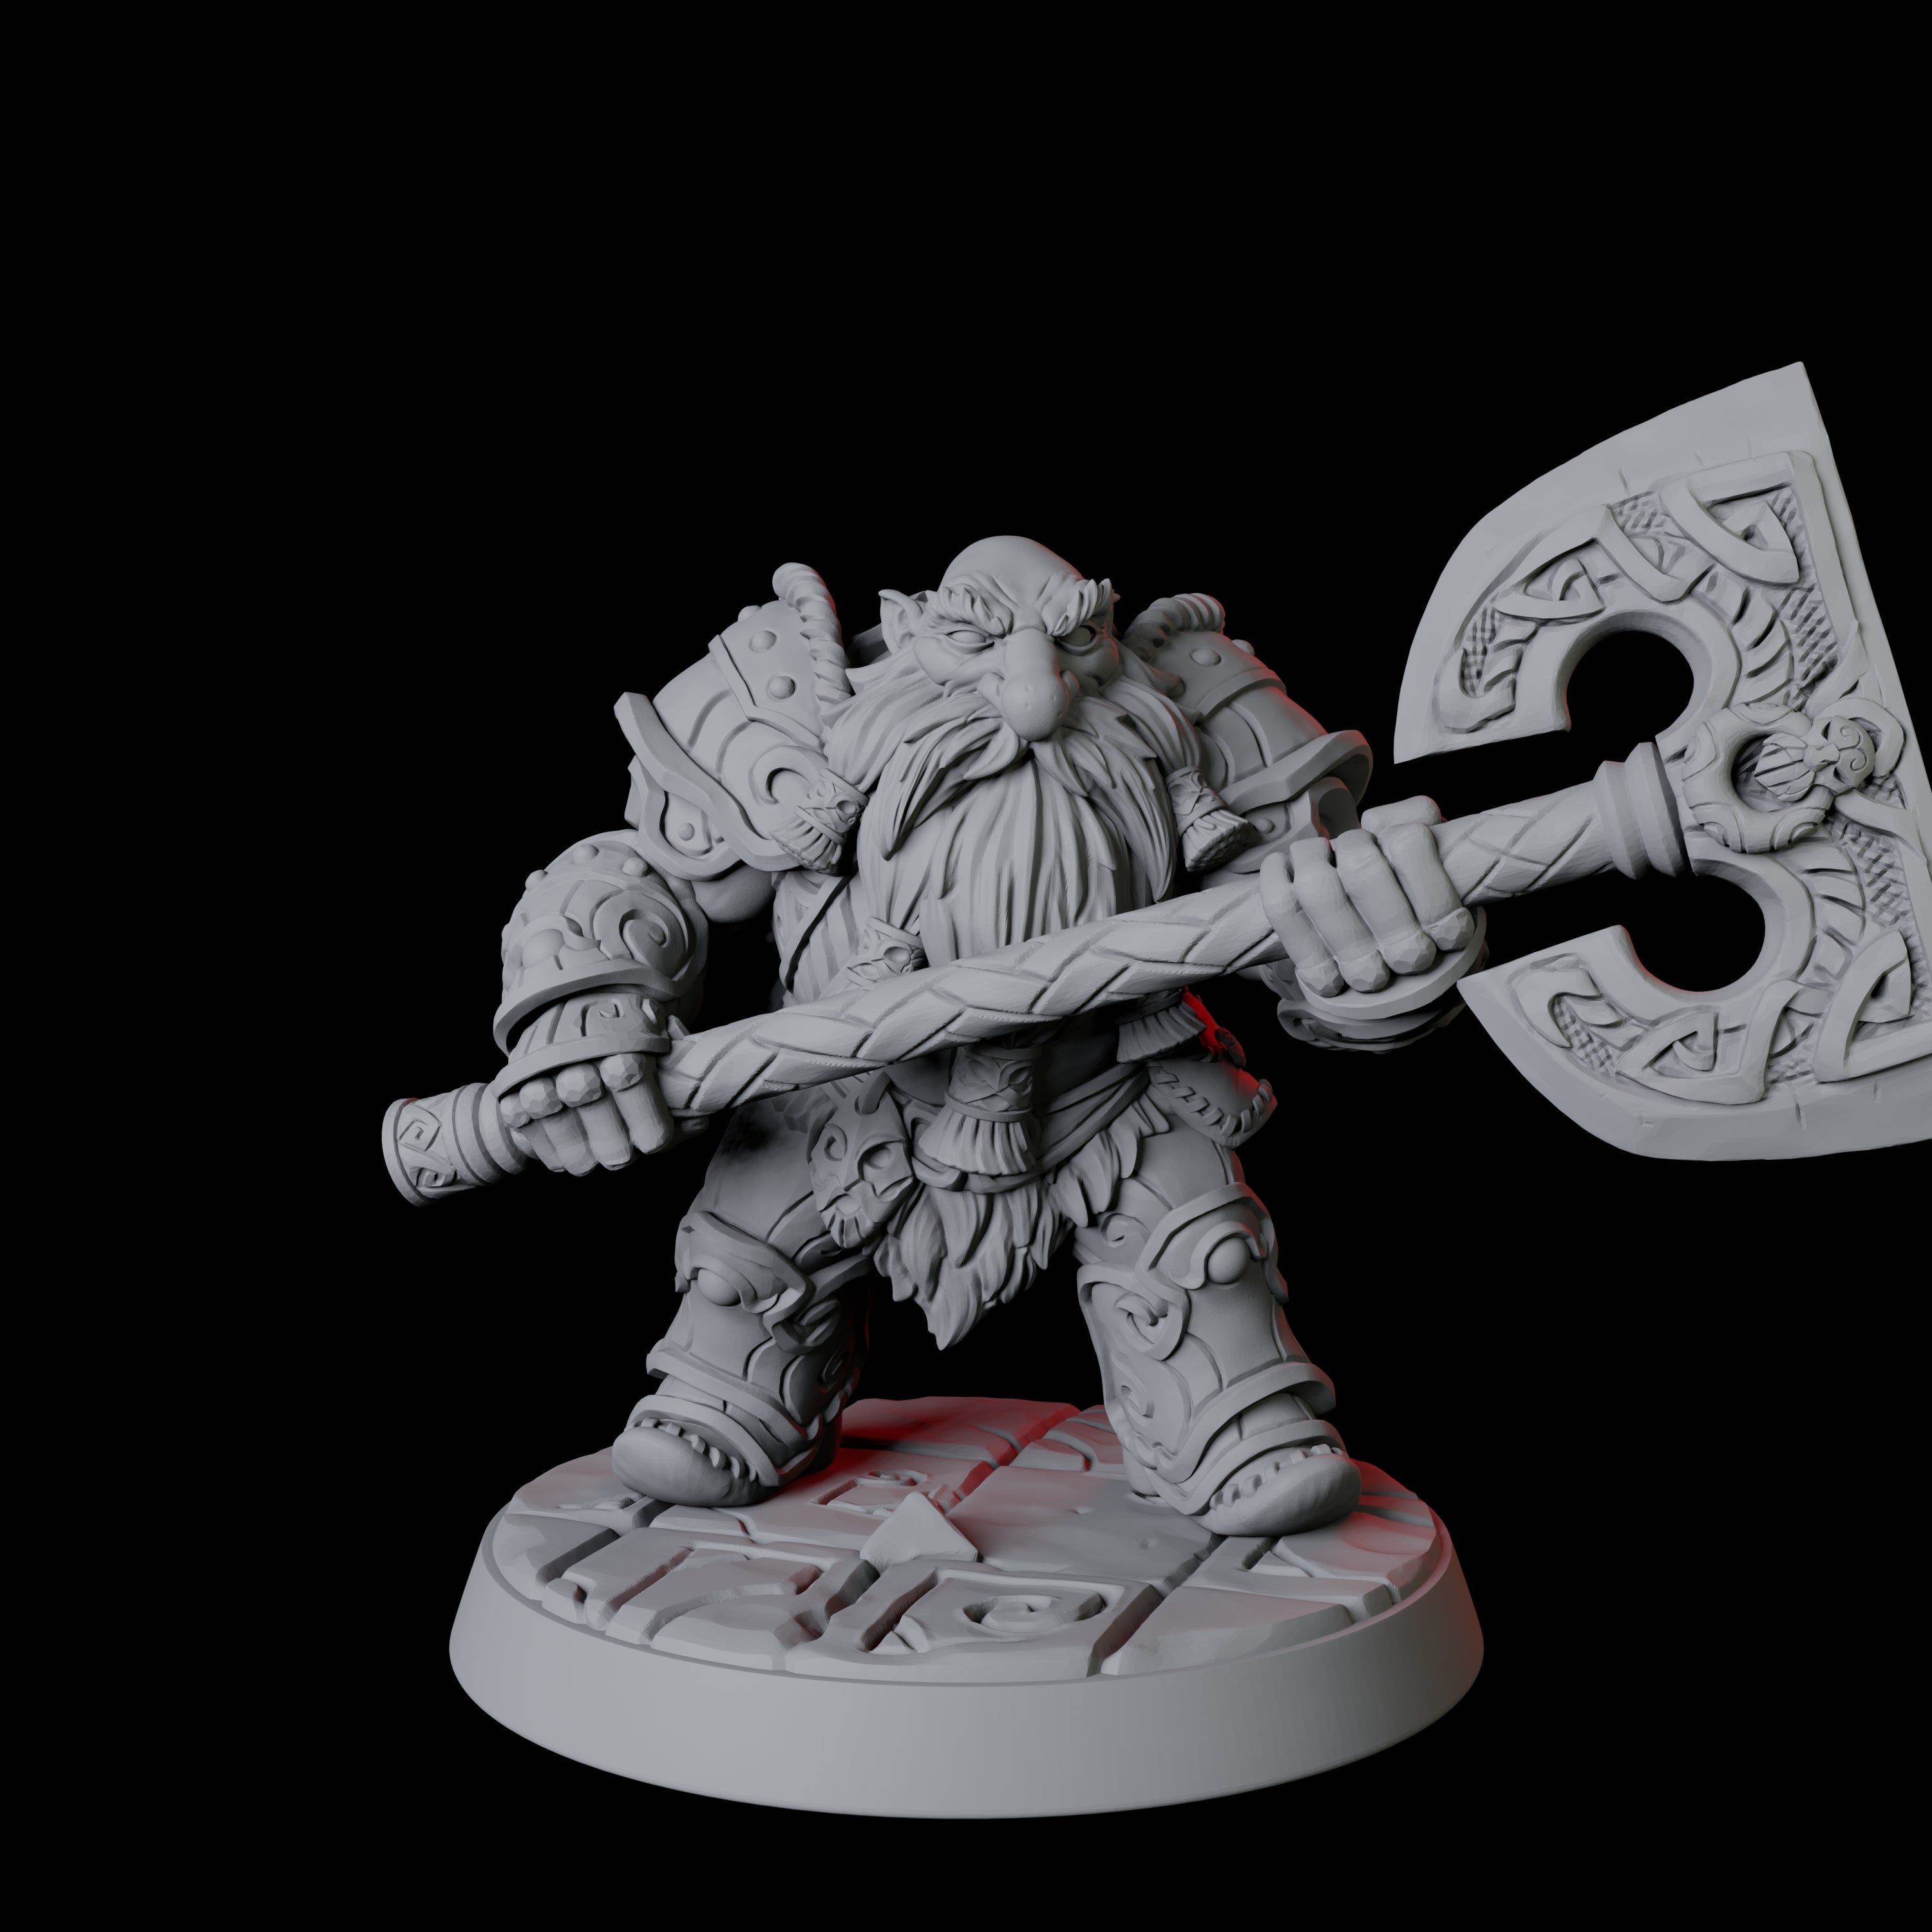 City Guard Dwarf B Miniature for Dungeons and Dragons, Pathfinder or other TTRPGs